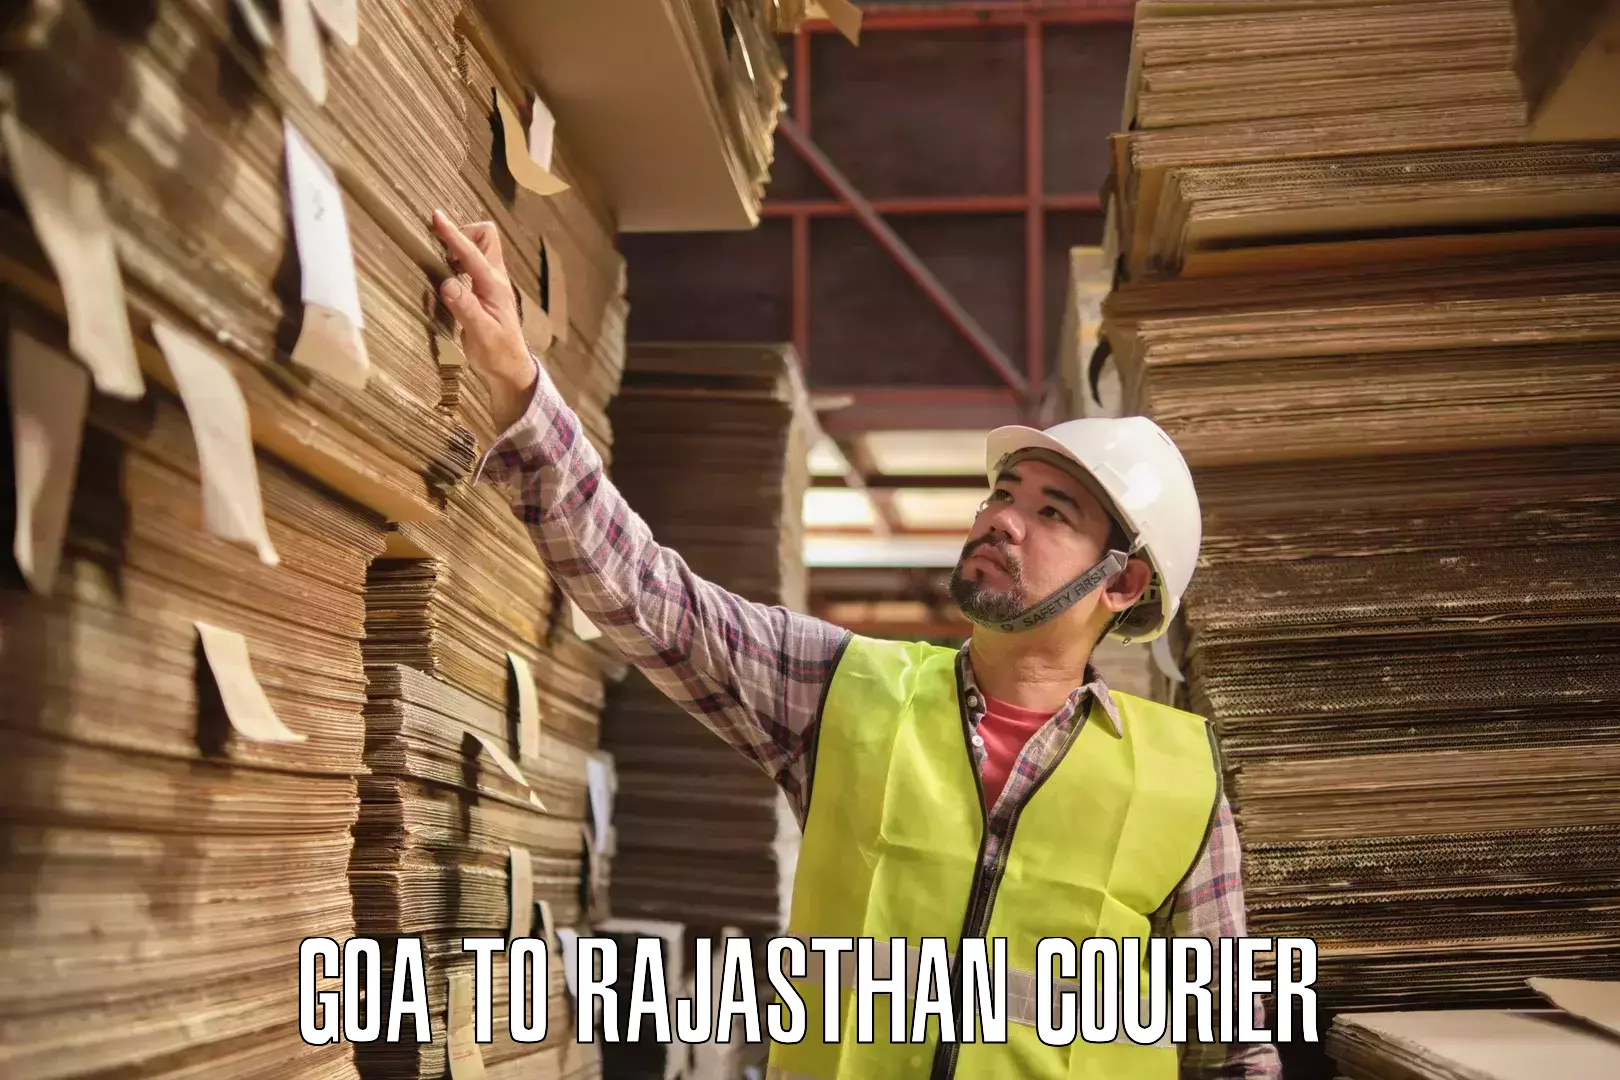 Multi-national courier services Goa to Jaipur